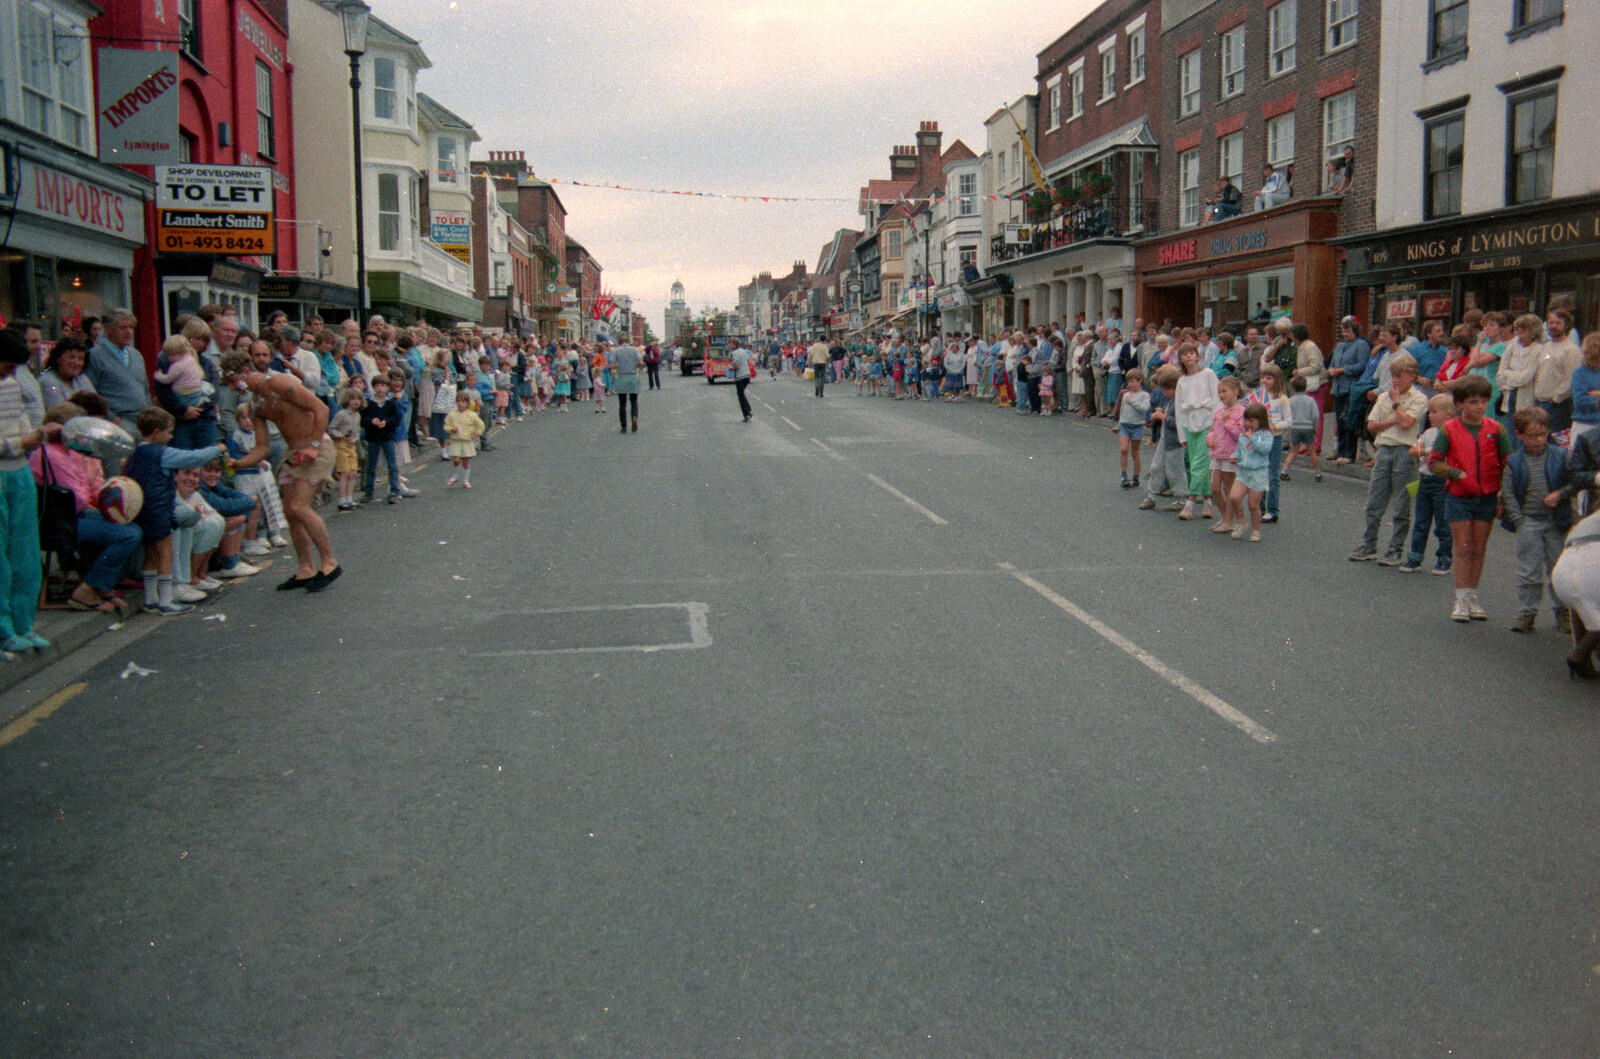 The crowds wait for the carnival on Lymington High Street from The Lymington Carnival, Hampshire - 17th June 1985